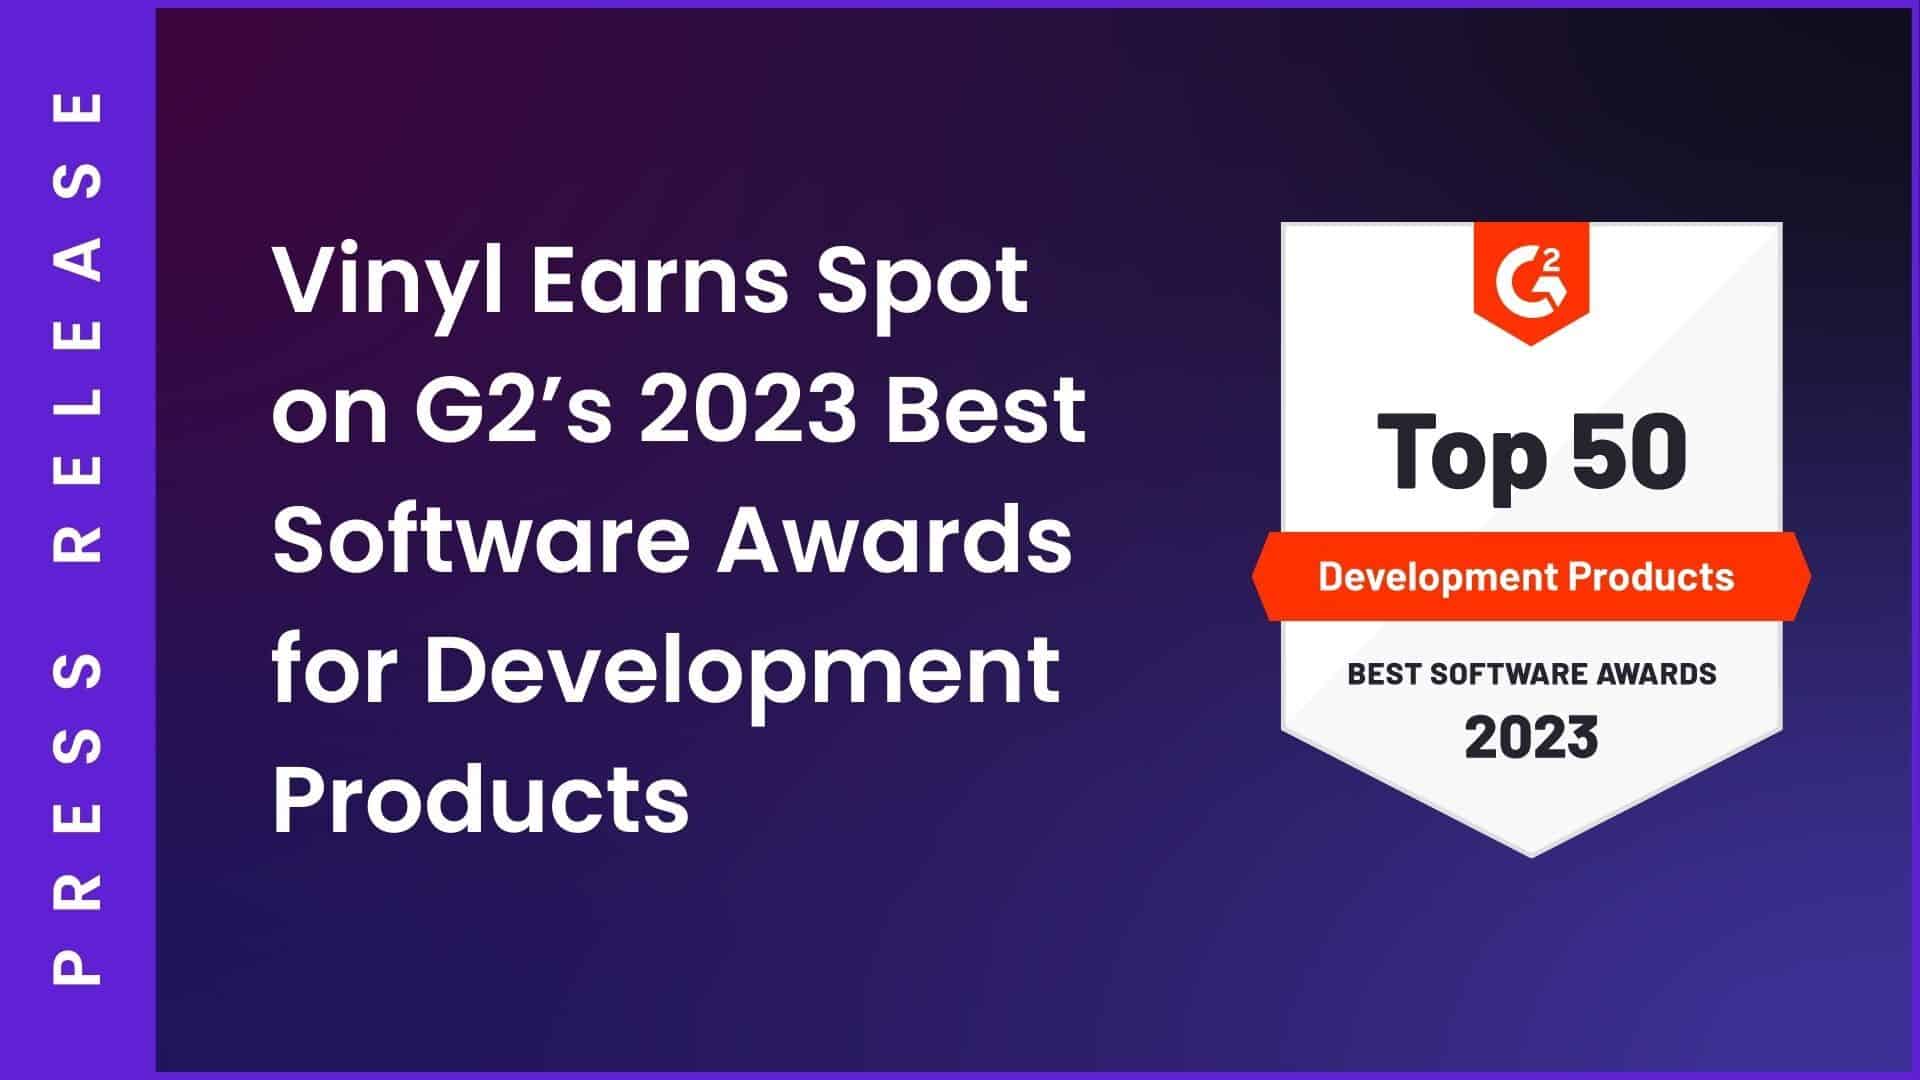 Vinyl Earns Spot on G2’s 2023 Best Software Awards for Development Products